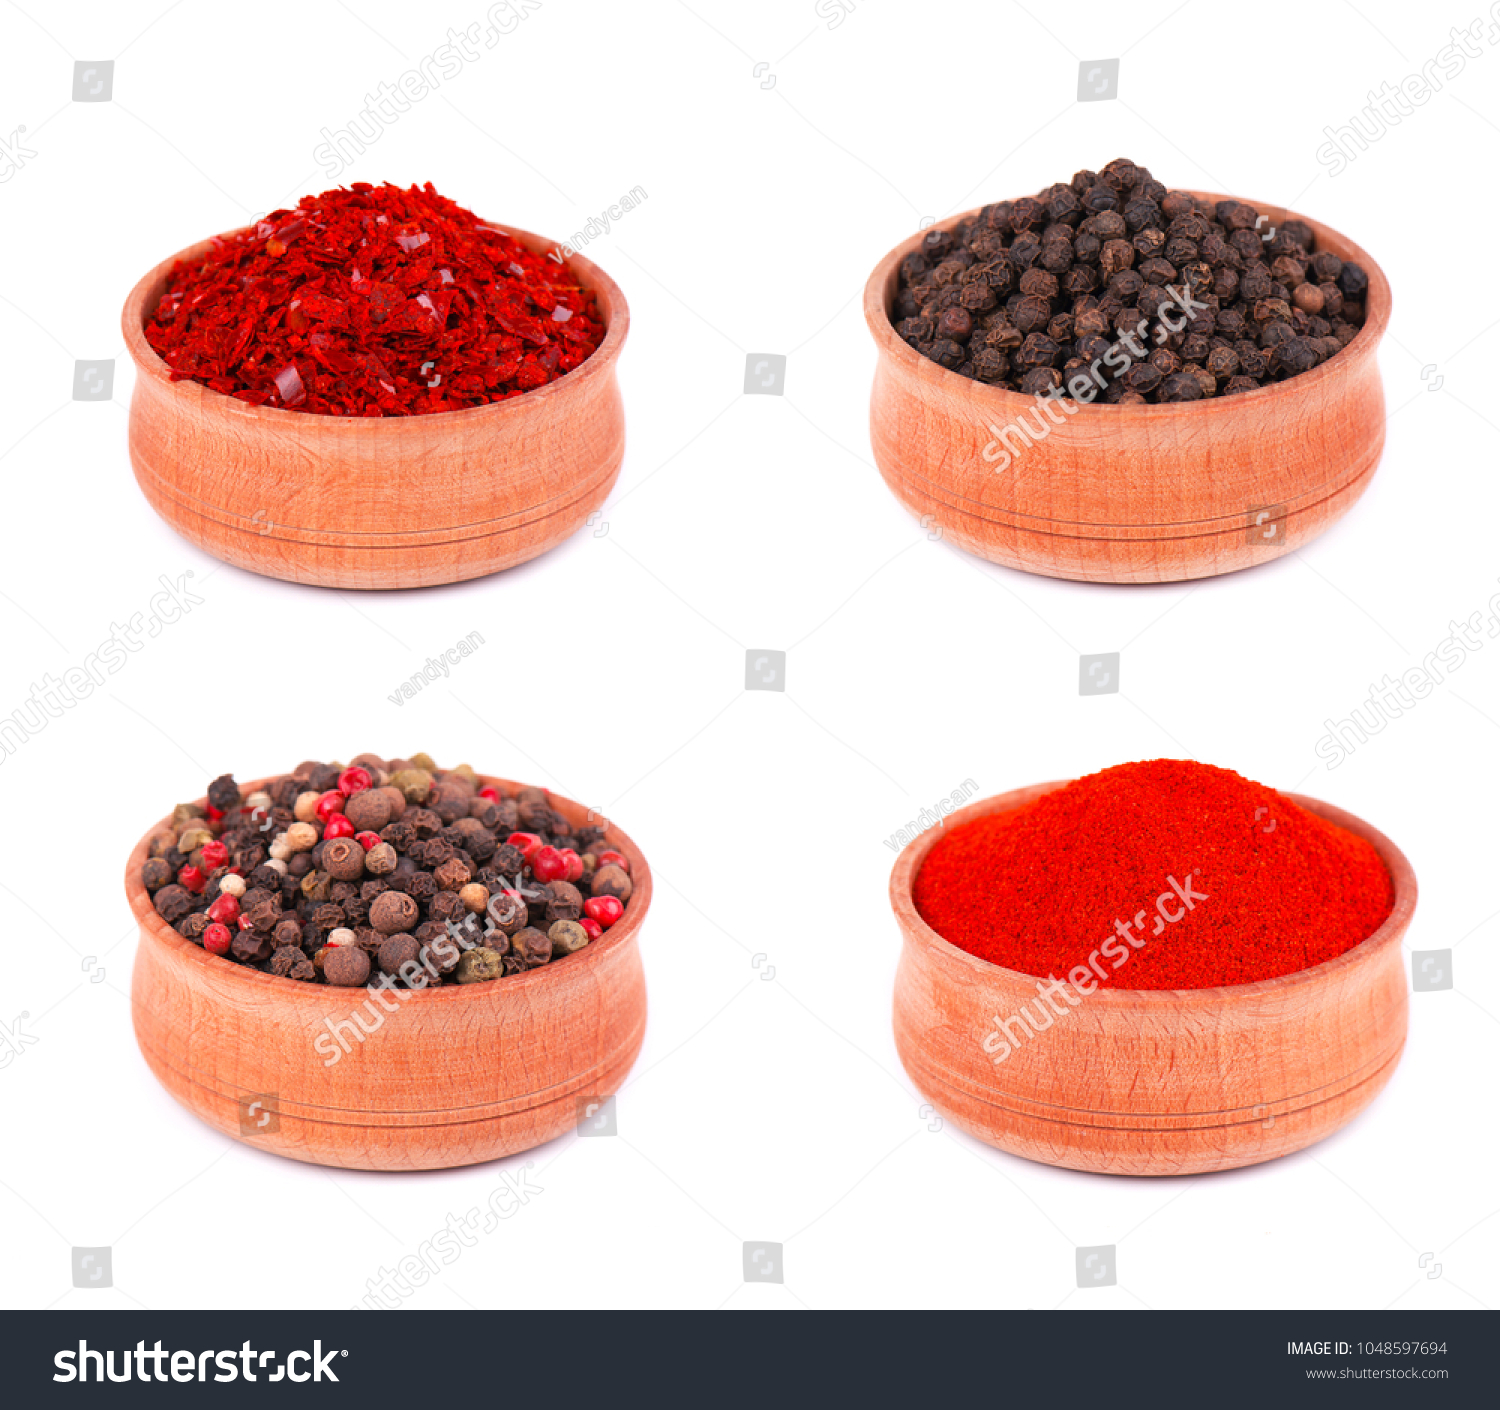 Spice selection of paprika, mixed spice, cayenne pepper, and allspice ground in wooden bowl, isolated on white background. Collage of peppers and powder on white background. #1048597694